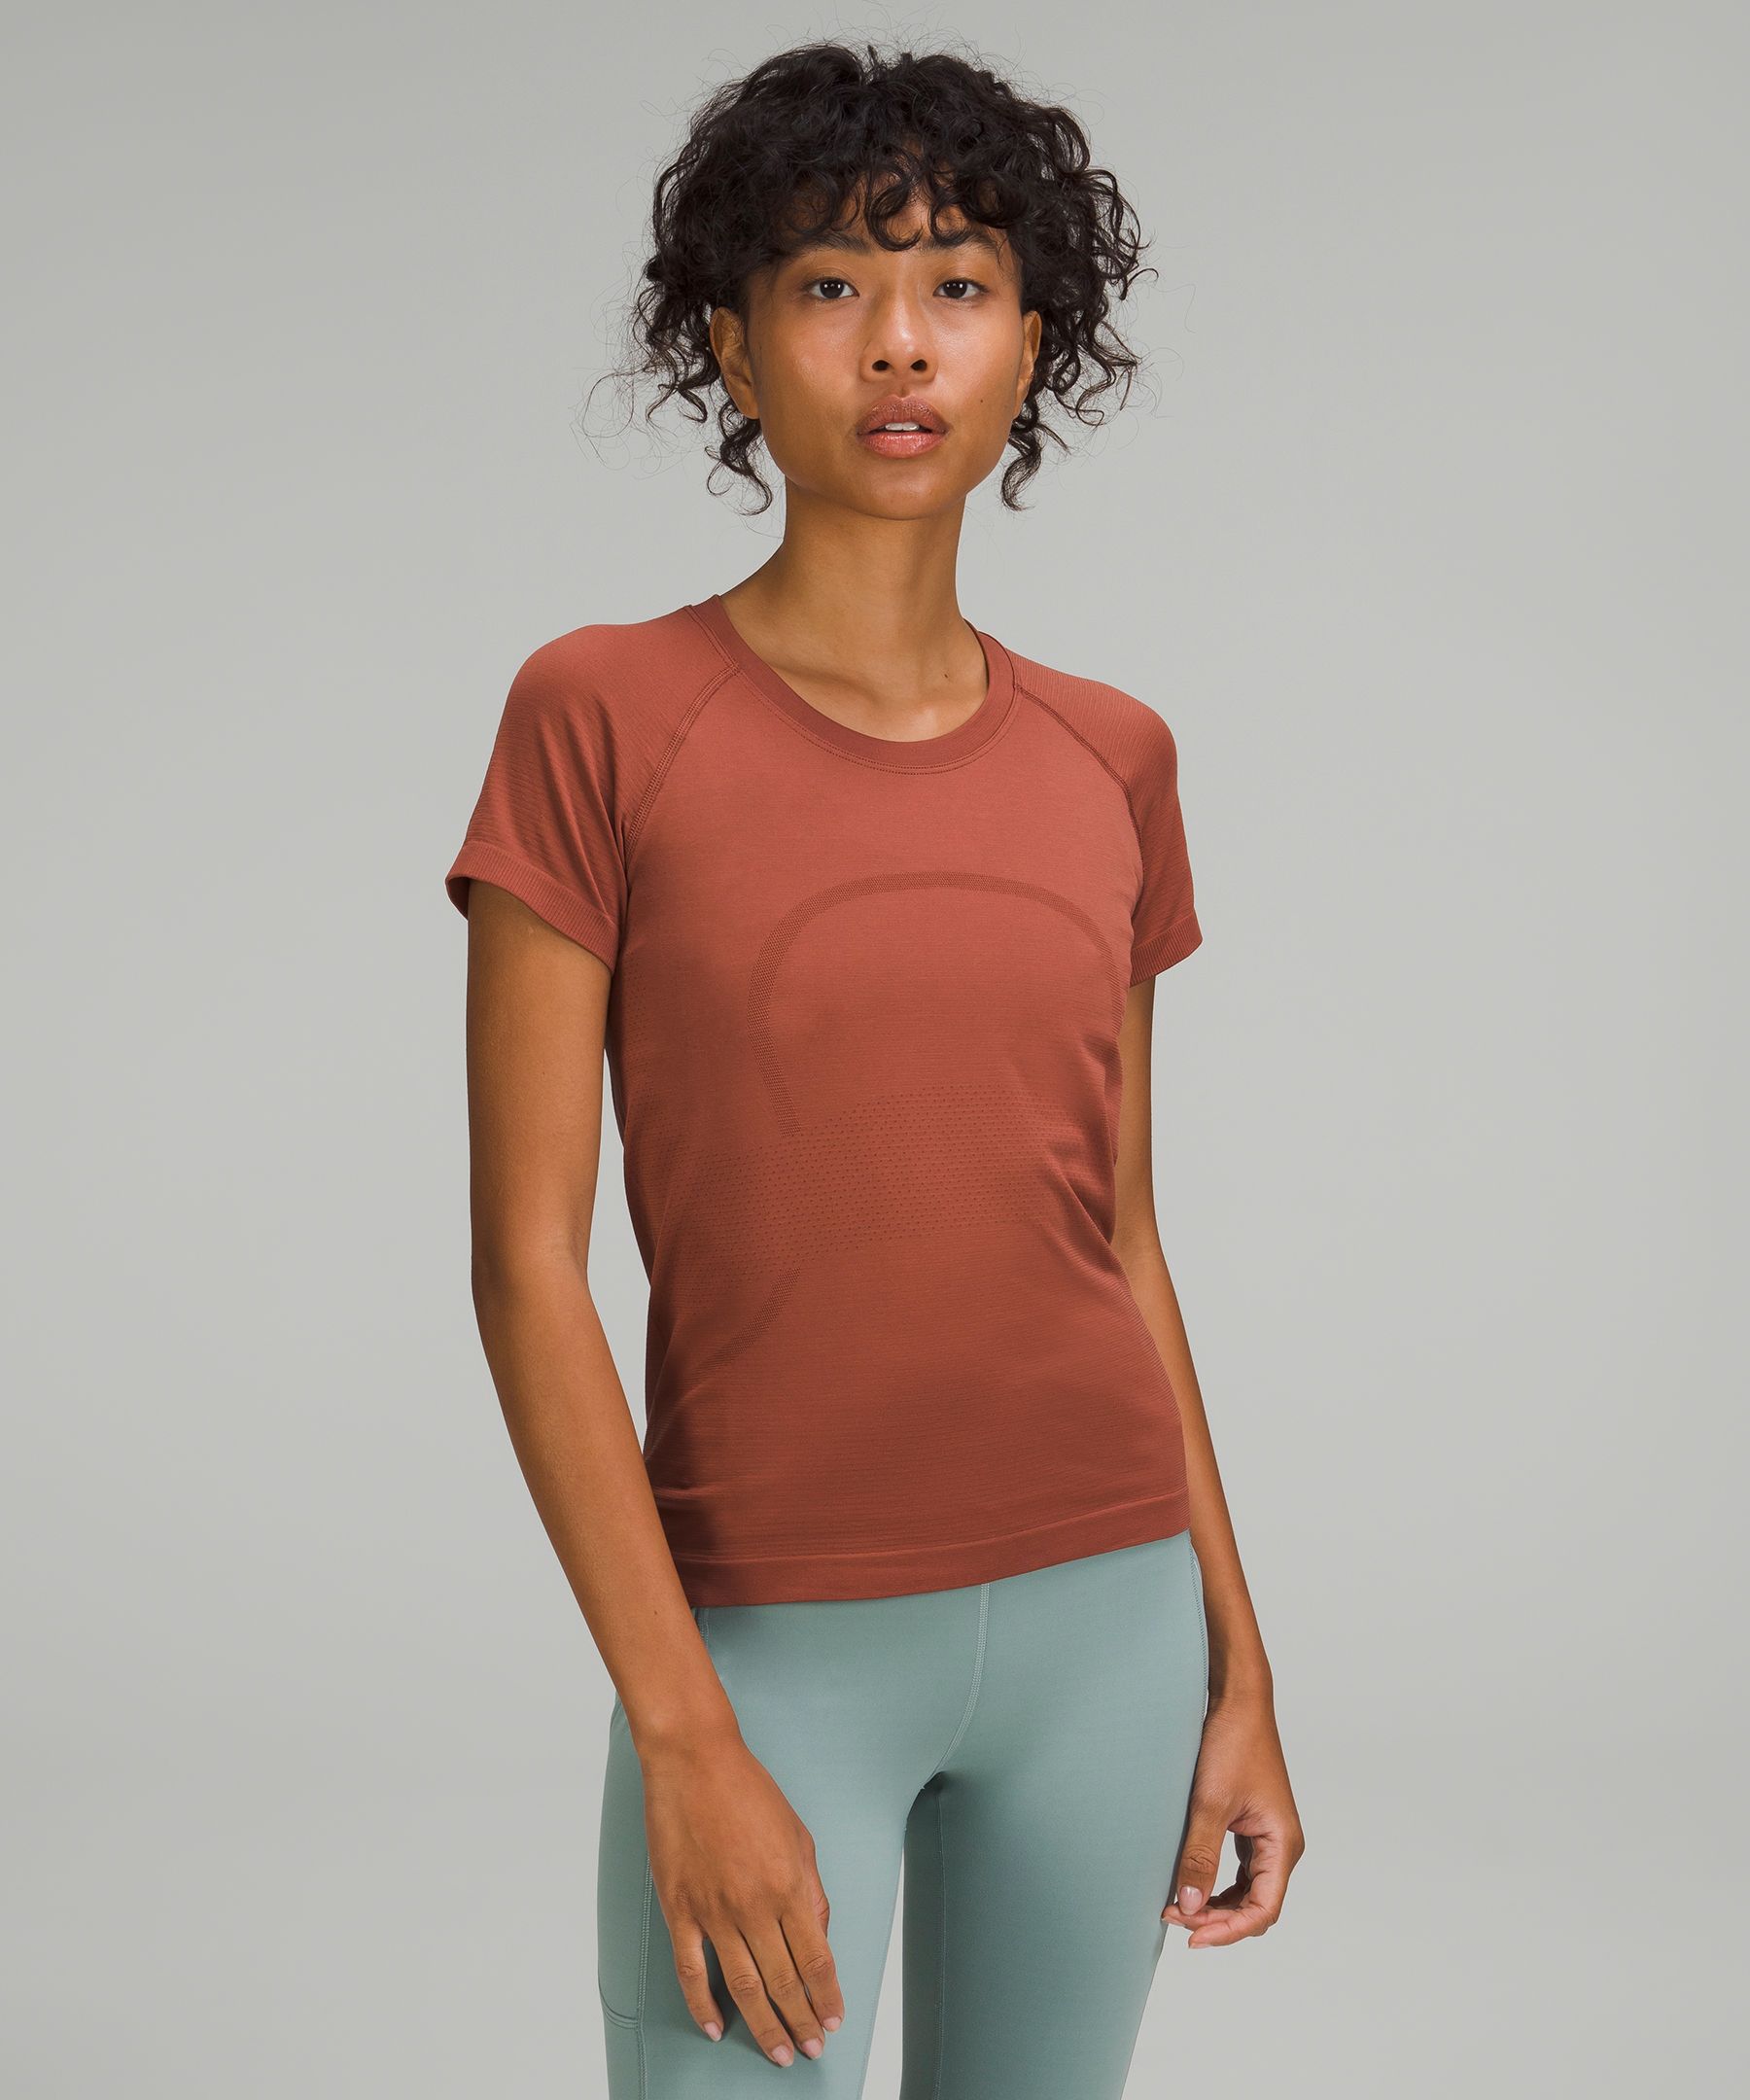 Lululemon Swiftly Tech Short Sleeve Shirt 2.0 Race Length In Ancient Copper/ancient Copper